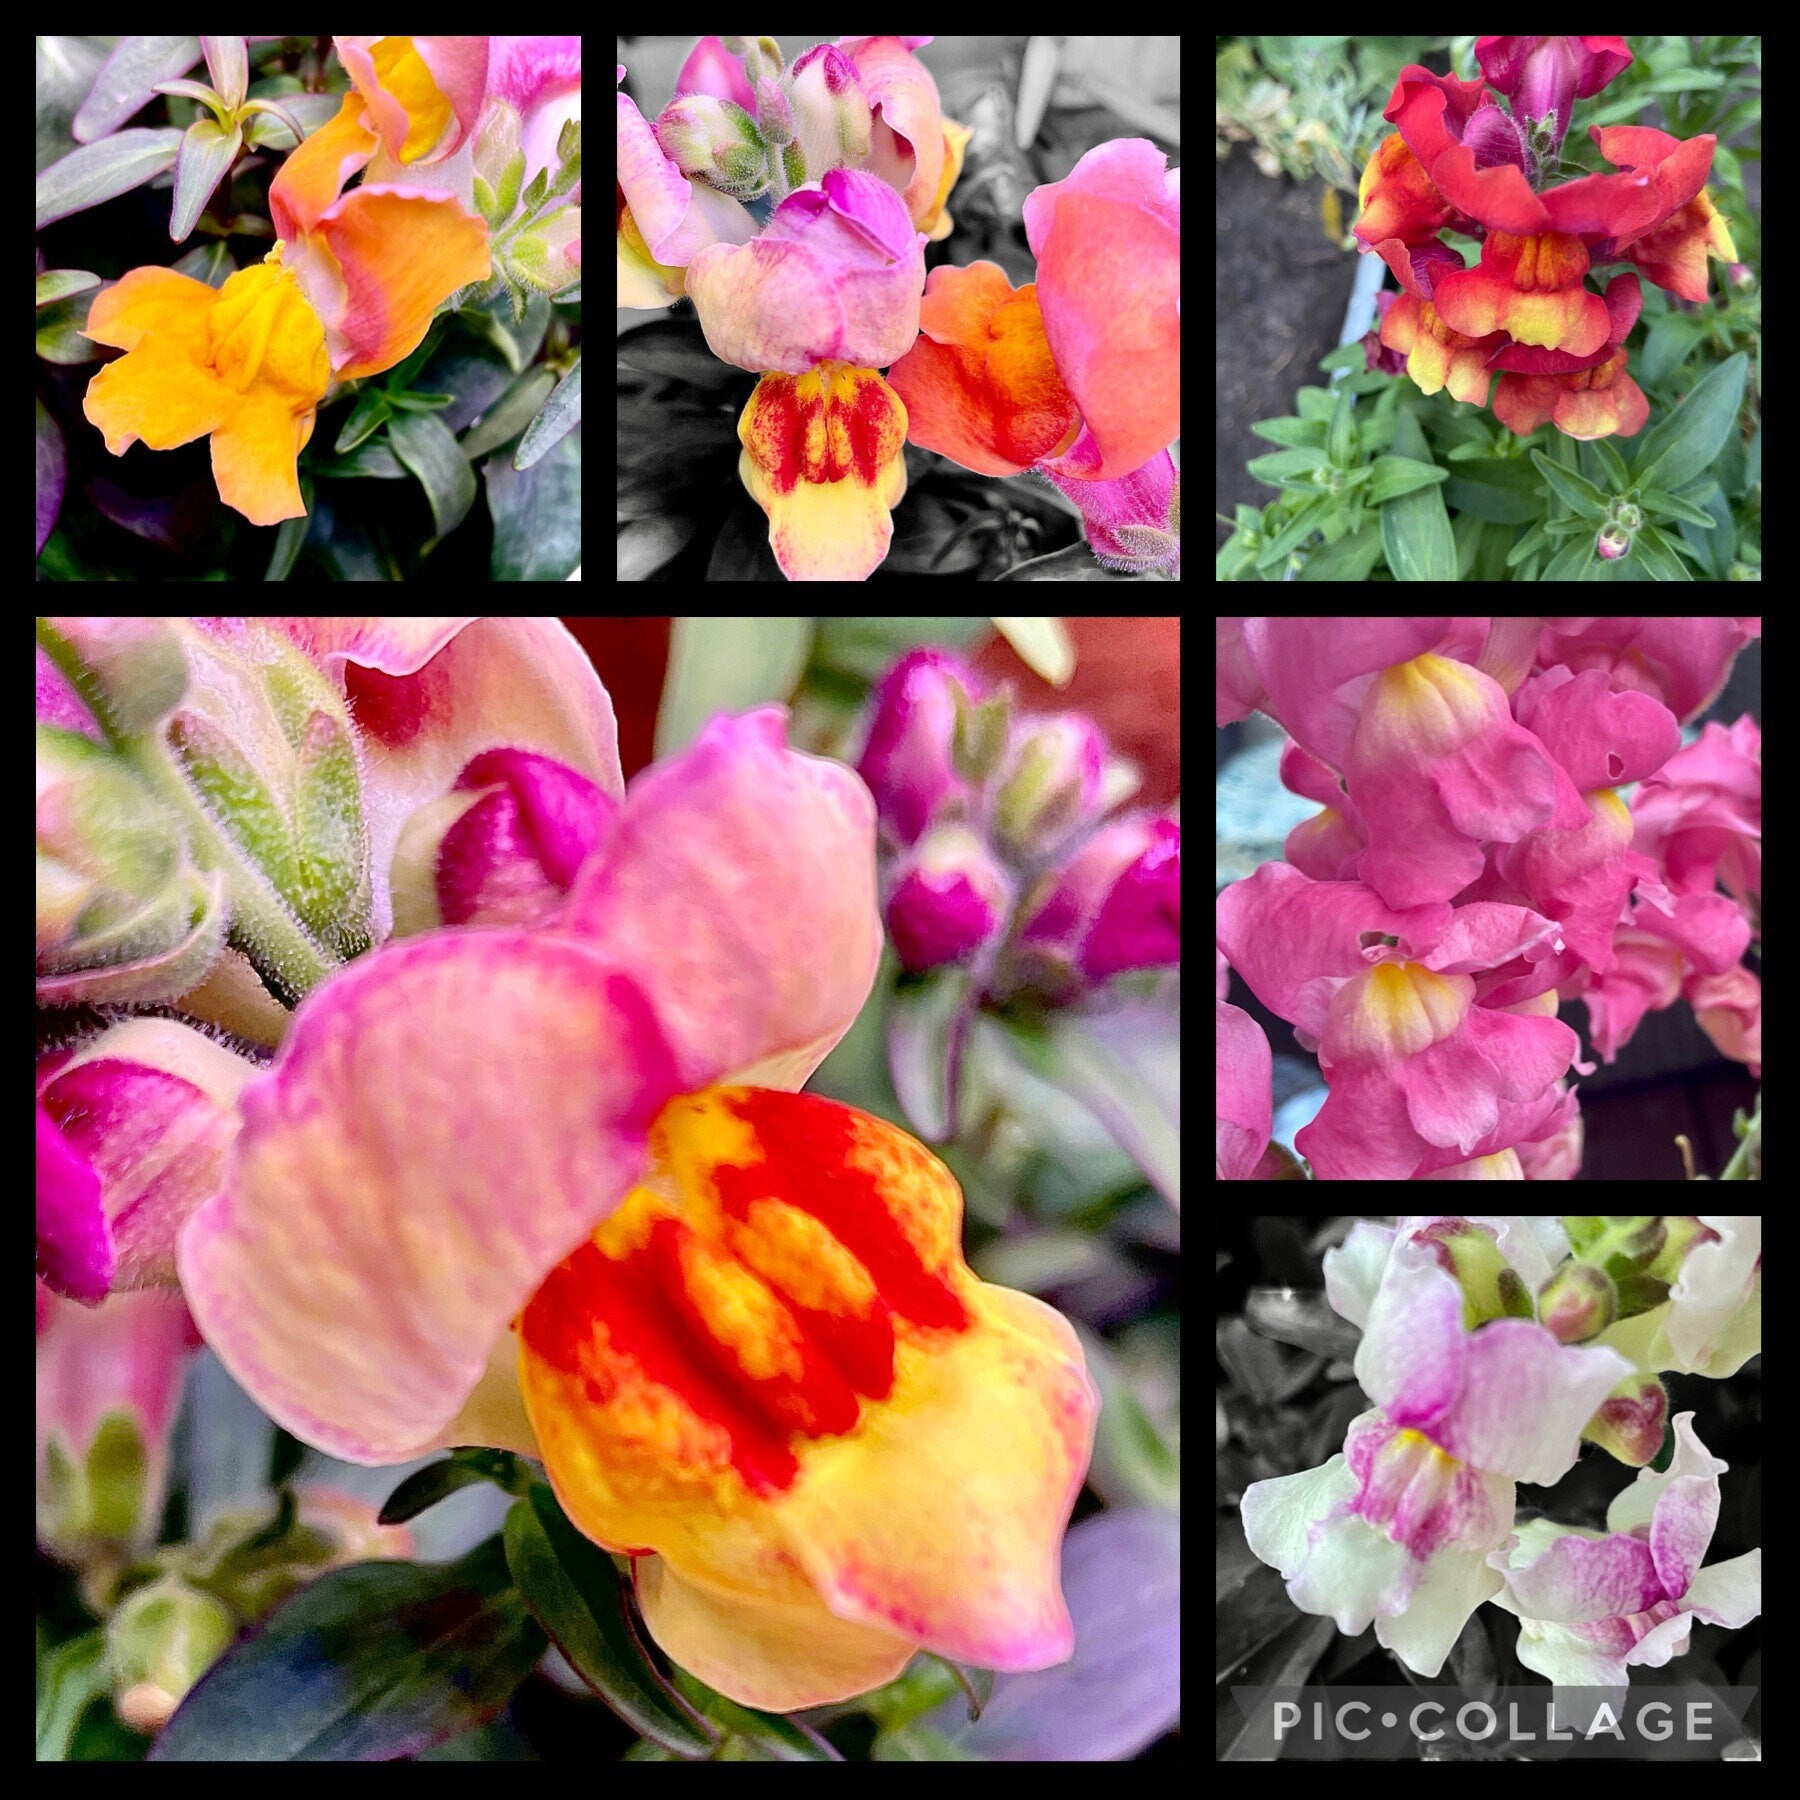 Snap Dragon - Flower Seeds - Short Variety - Perfect for Stunning Cut Flowers